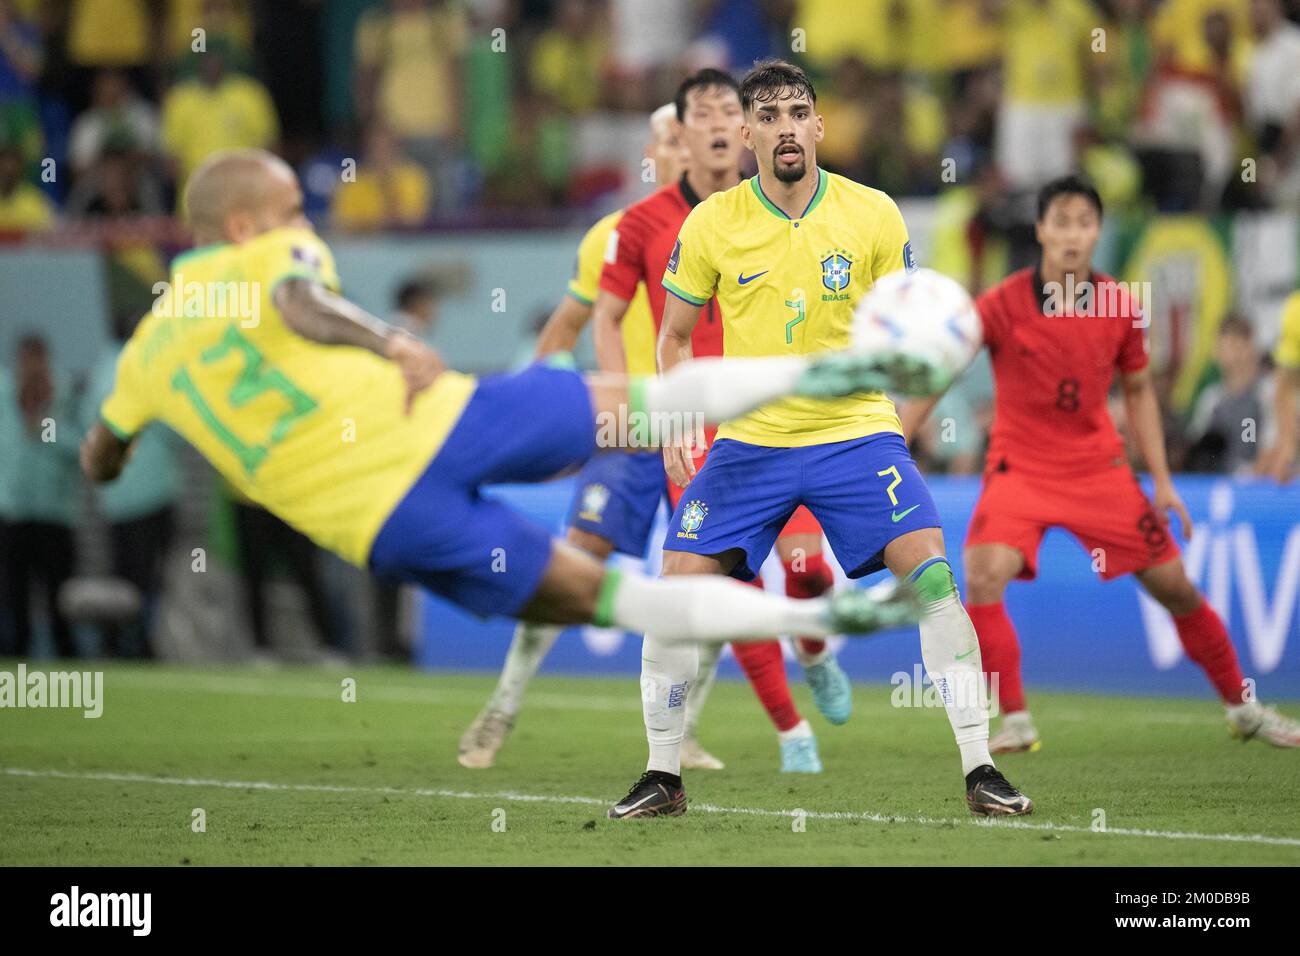 Doha, Qatar. December 05, 2022, Dani Alves and Lucas Paqueta of Brazil in action during the FIFA World Cup Qatar 2022 Round of 16 match between Brazil v Korea Republic at Stadium 974, on December 05, 2022 in Doha, Qatar. Photo by David Niviere/ABACAPRESS.COM Stock Photo